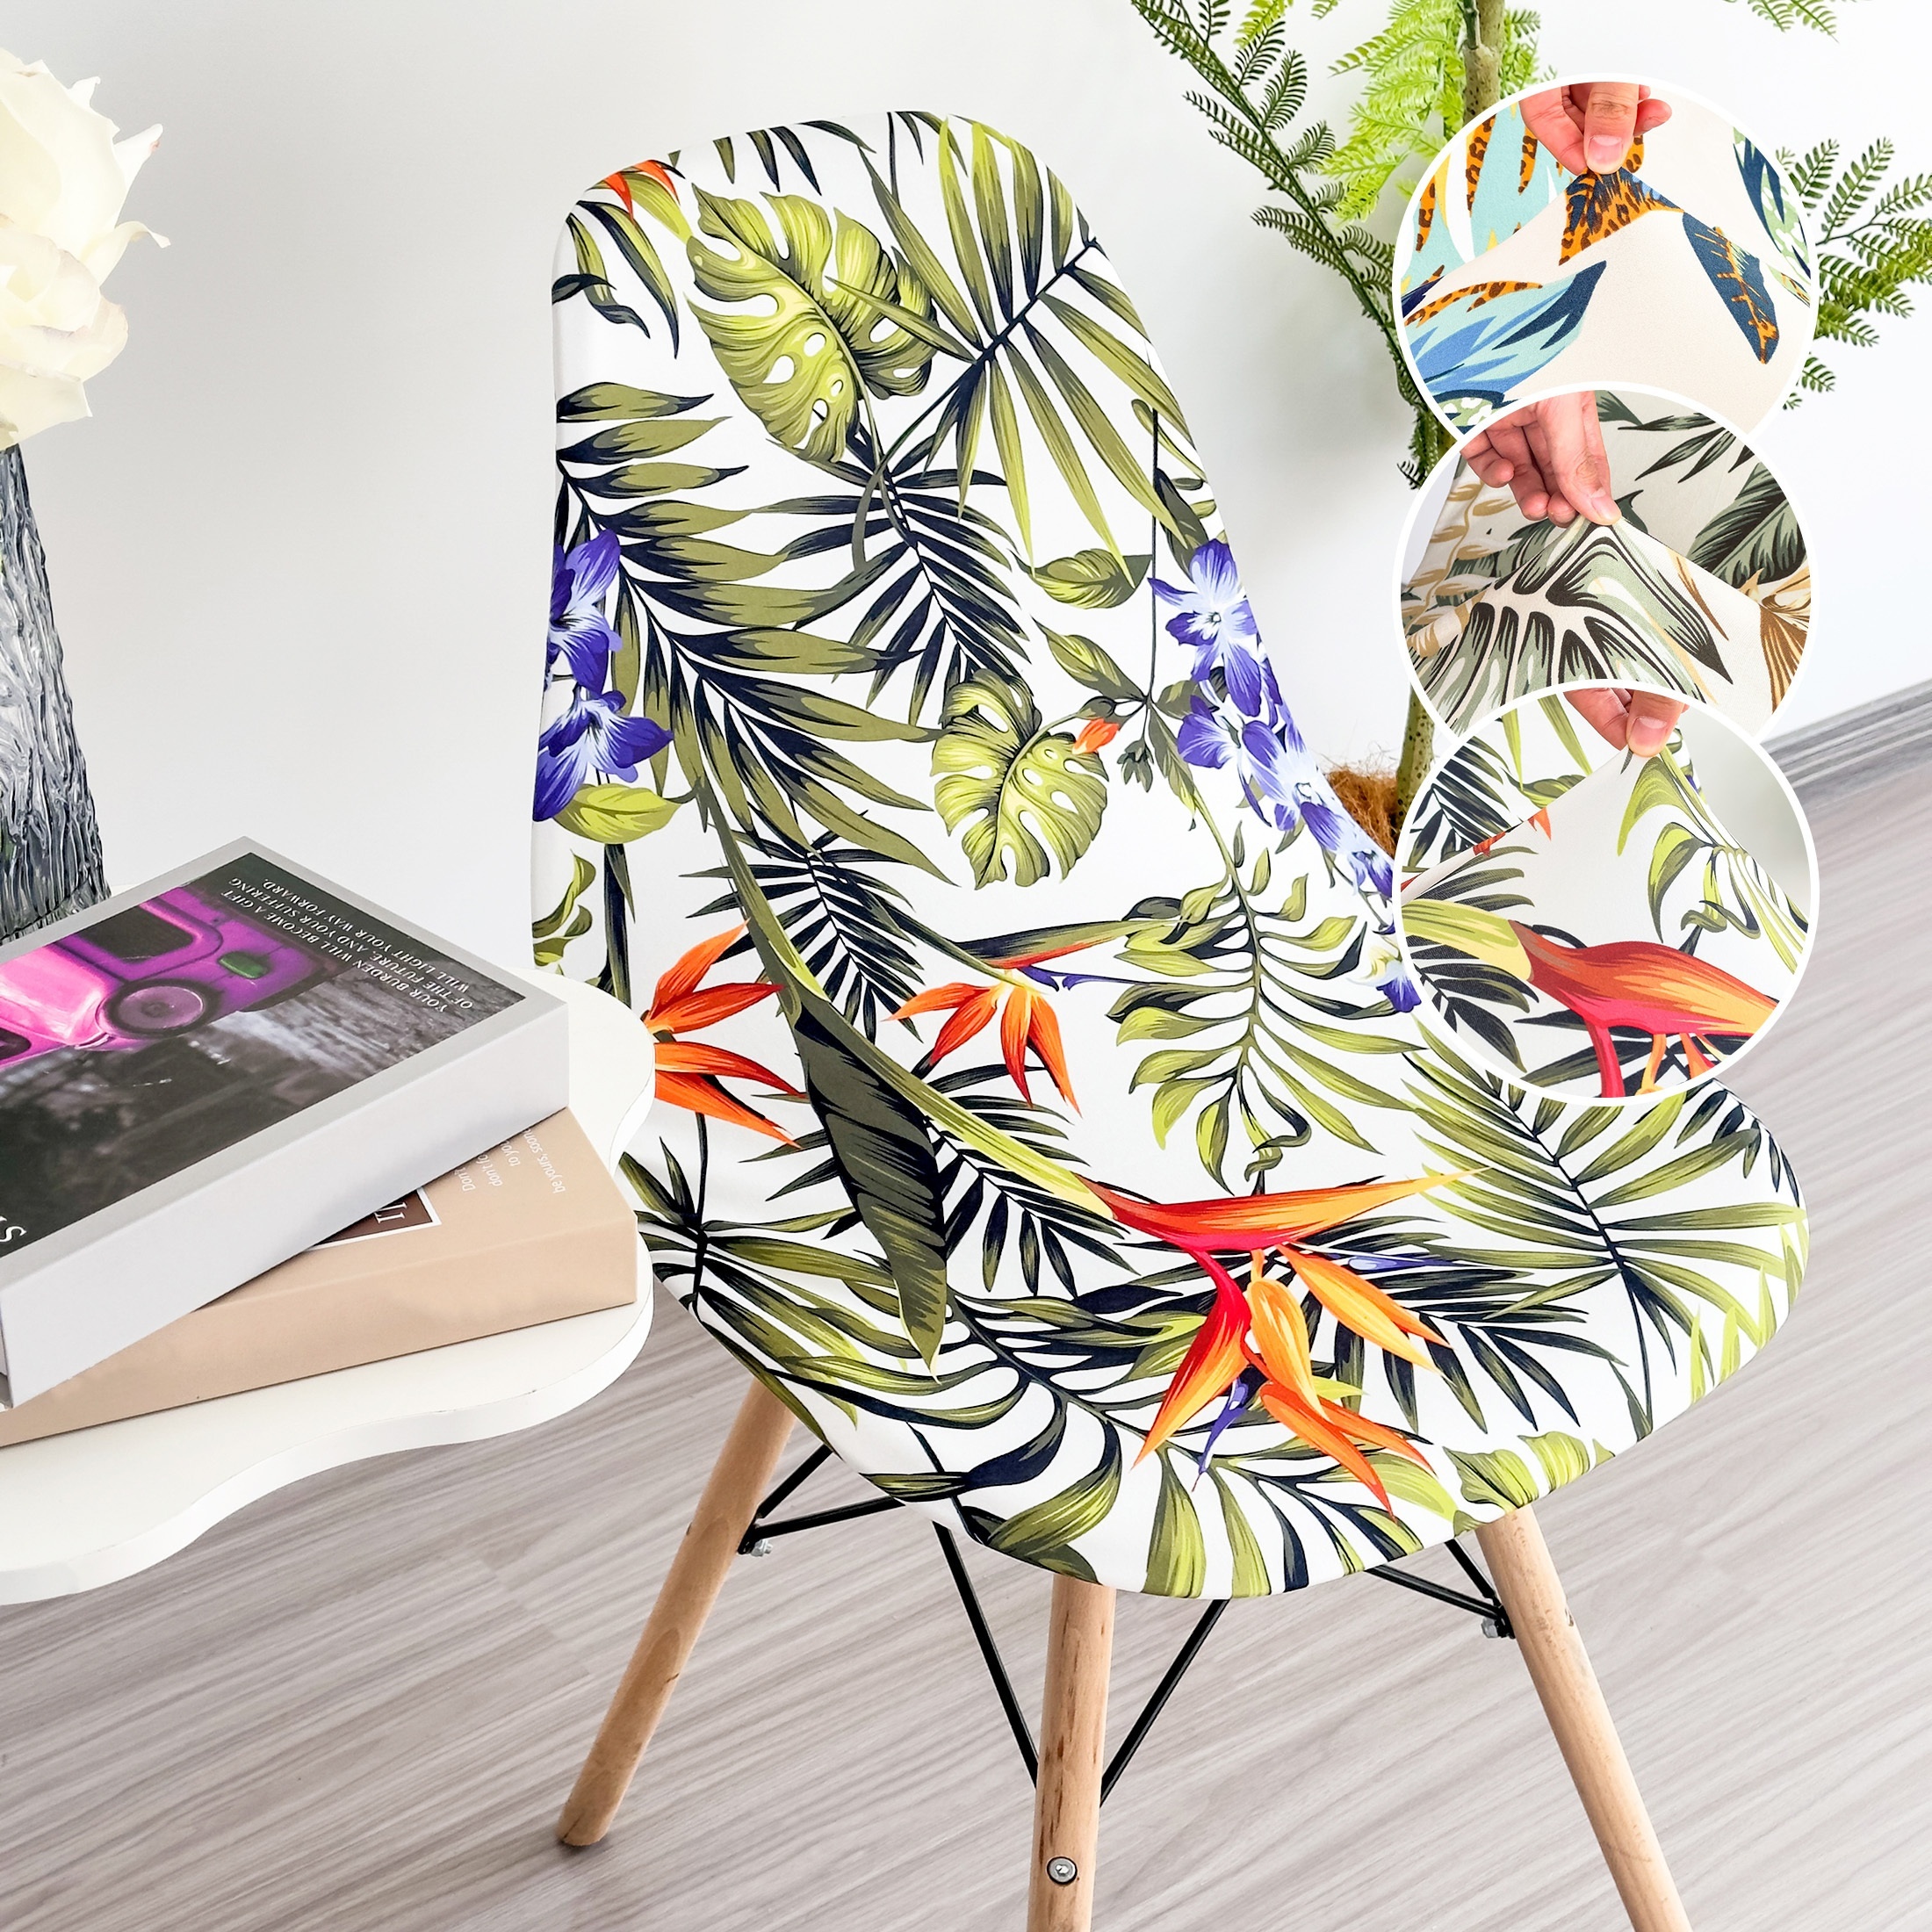 

1pc Fabric Elastic Shell Curved Eames Chair Cover Modern Tropical Plant Print Chair Slipcover Removable And Washable For All Seasons Home Decor